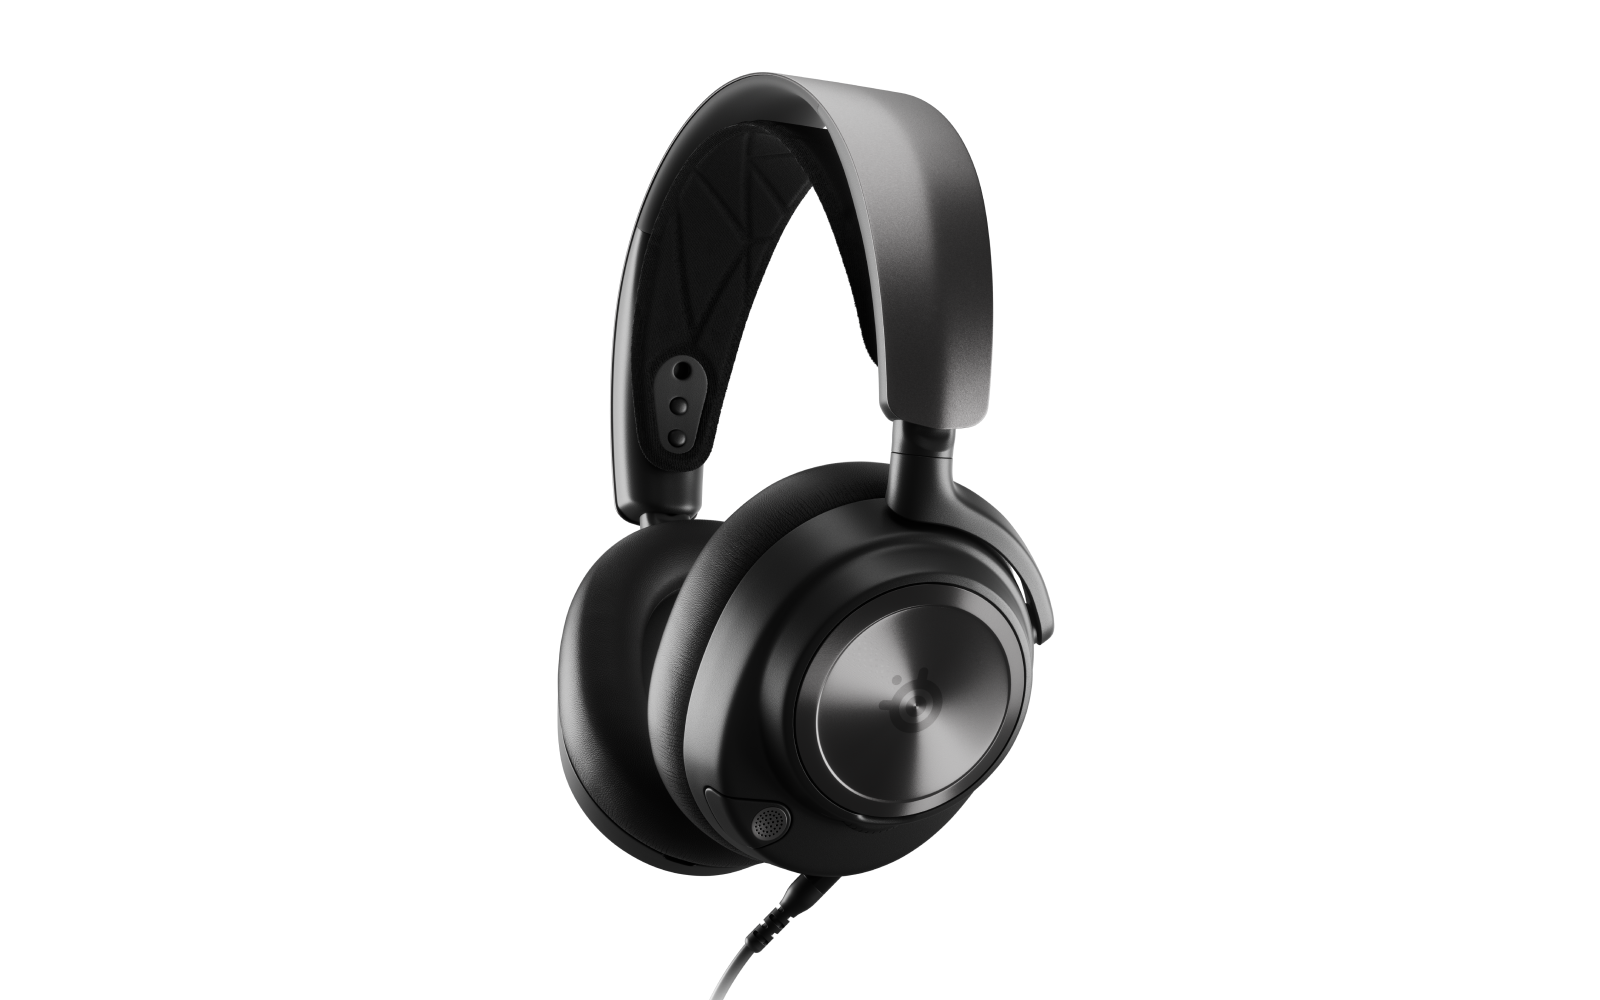 A wired headset compatible with the Arena 9 speaker.